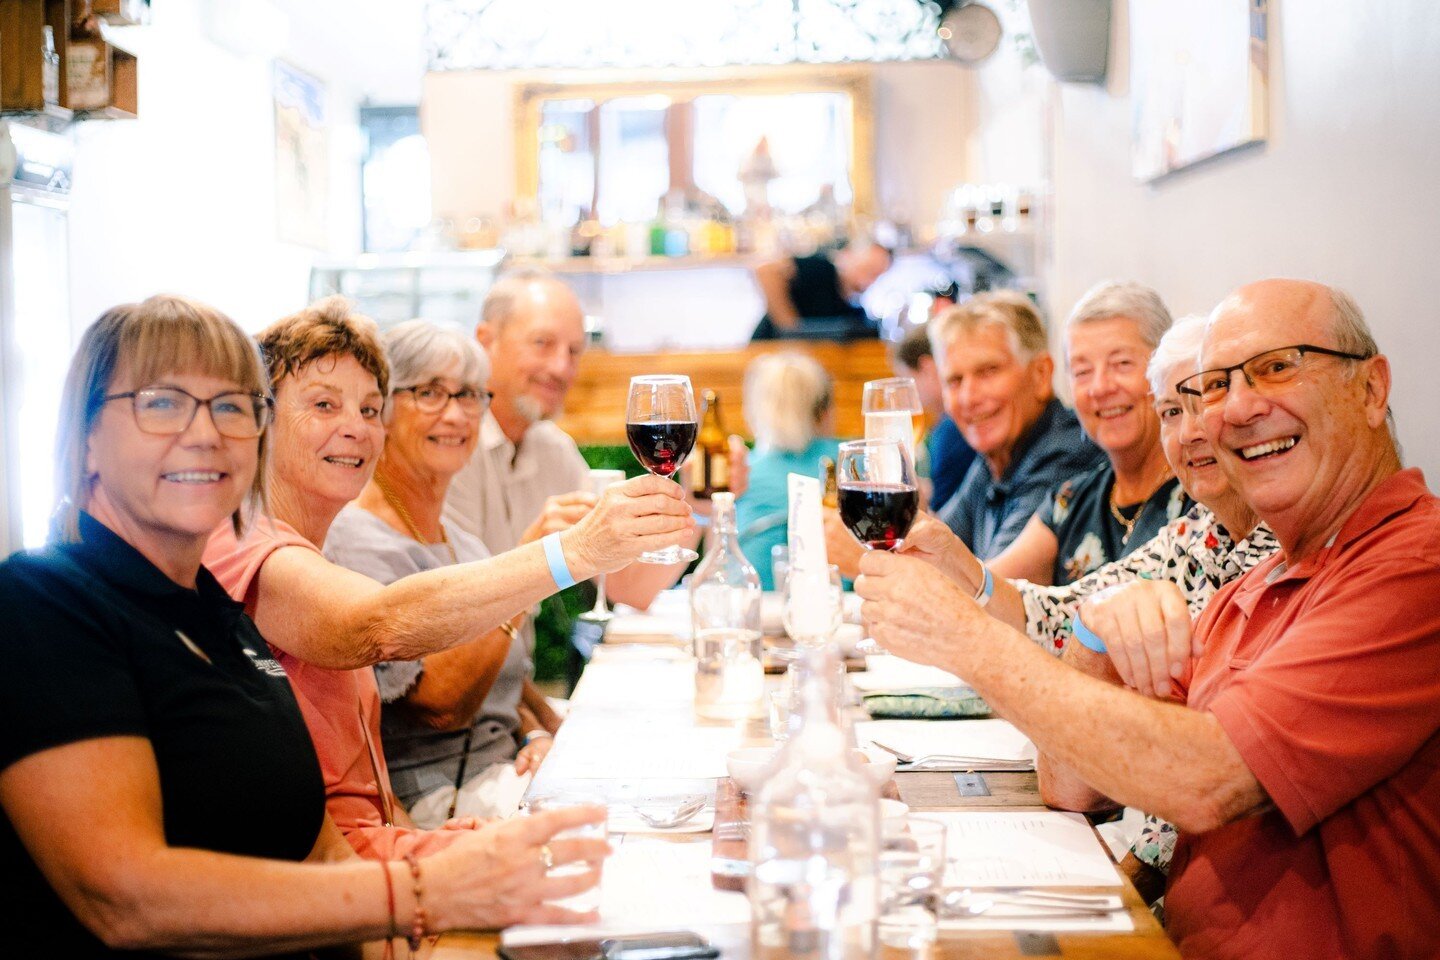 Loved welcoming a beautiful group of locals recently for #AMovingFeast progressive dinner - we explored the best places to be and see in @MyMaitland walked a little and talked a lot - what a night! #LocalExperience #walkingtour #DiscoverMaitland #Foo